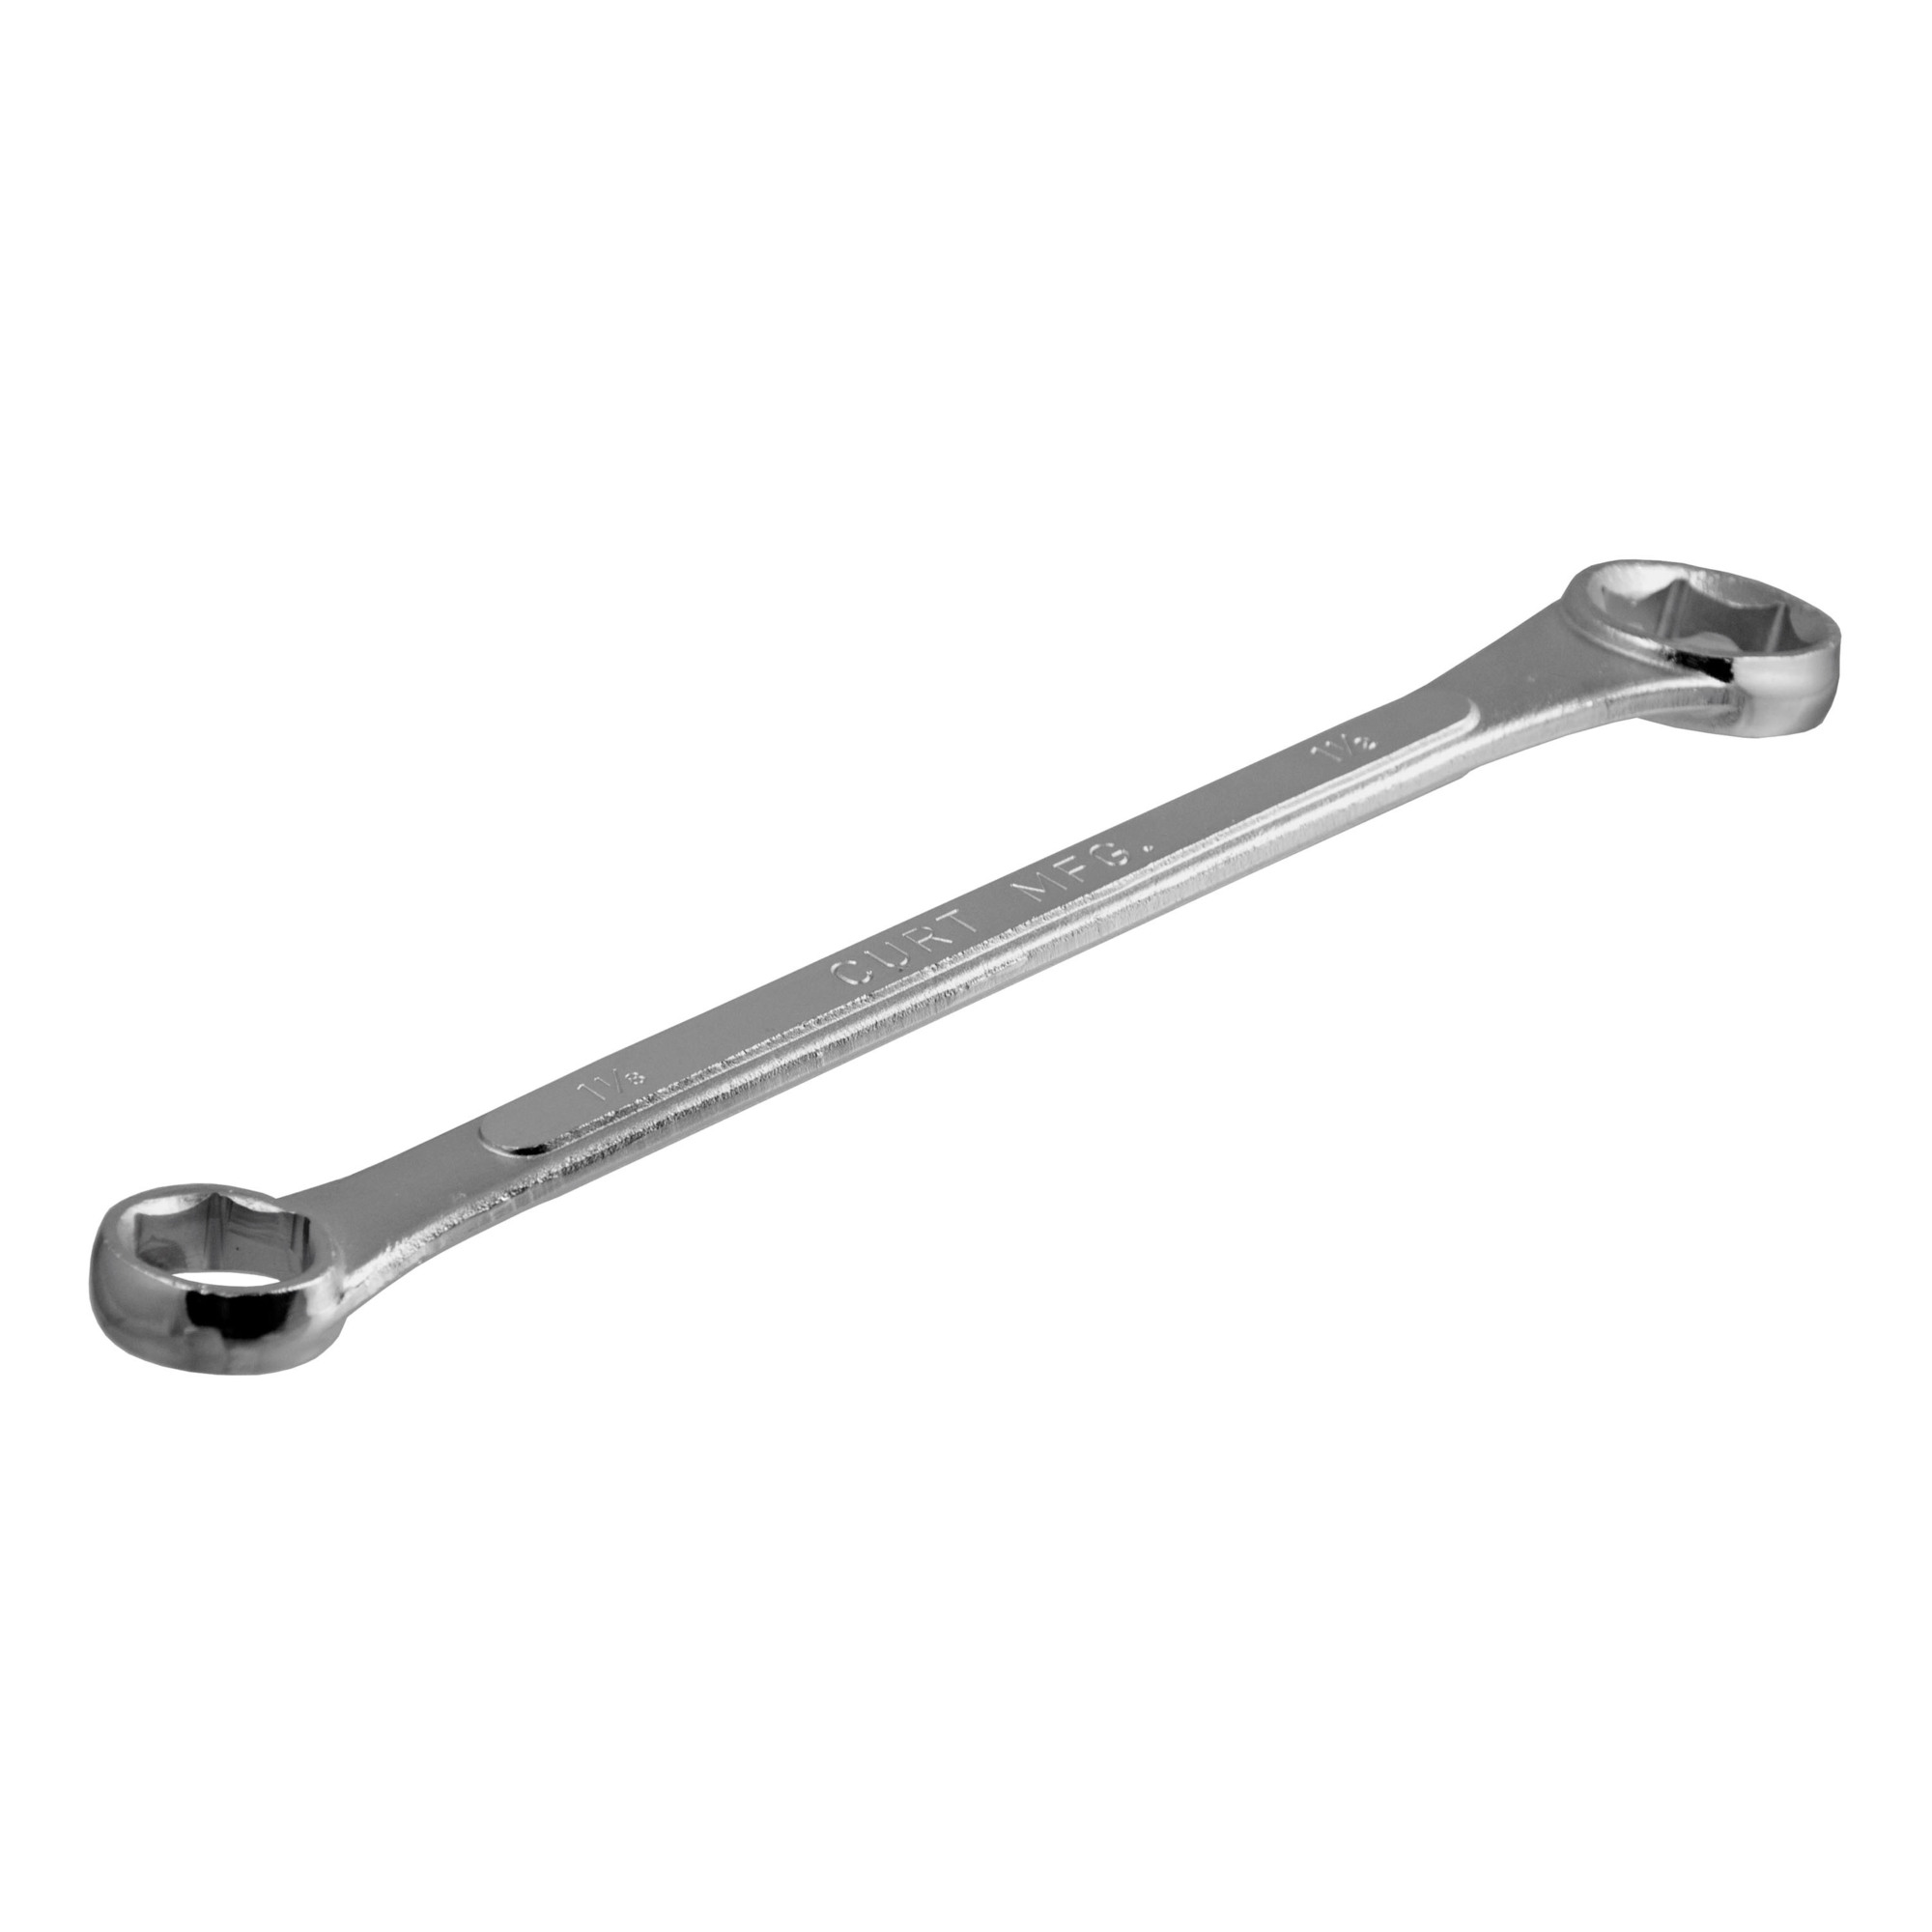 Curt Manufacturing, Trailer Ball Wrench Fits 1-1/8Inch or 1-1/2Inch Nuts, Material Steel, Model 20001